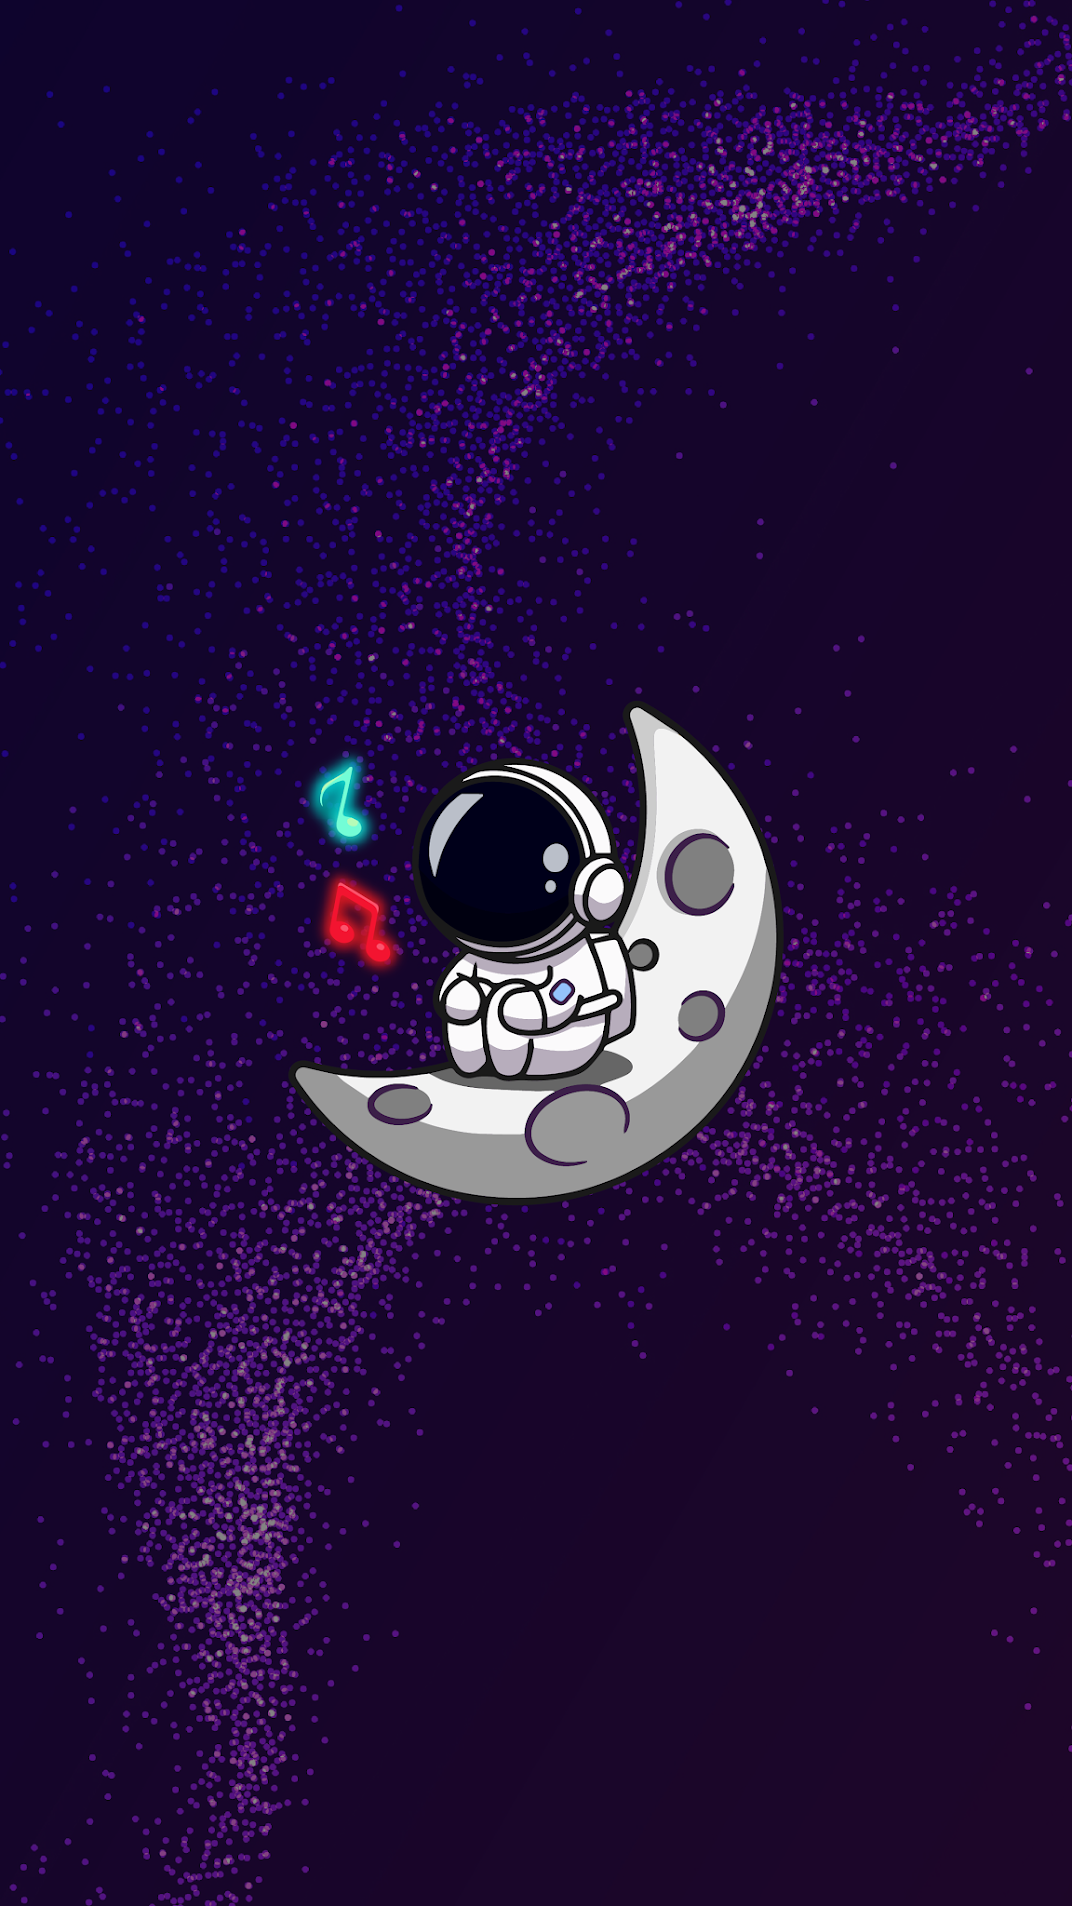 Cute minimalist astronaut in the moon to use as phone wallpaper